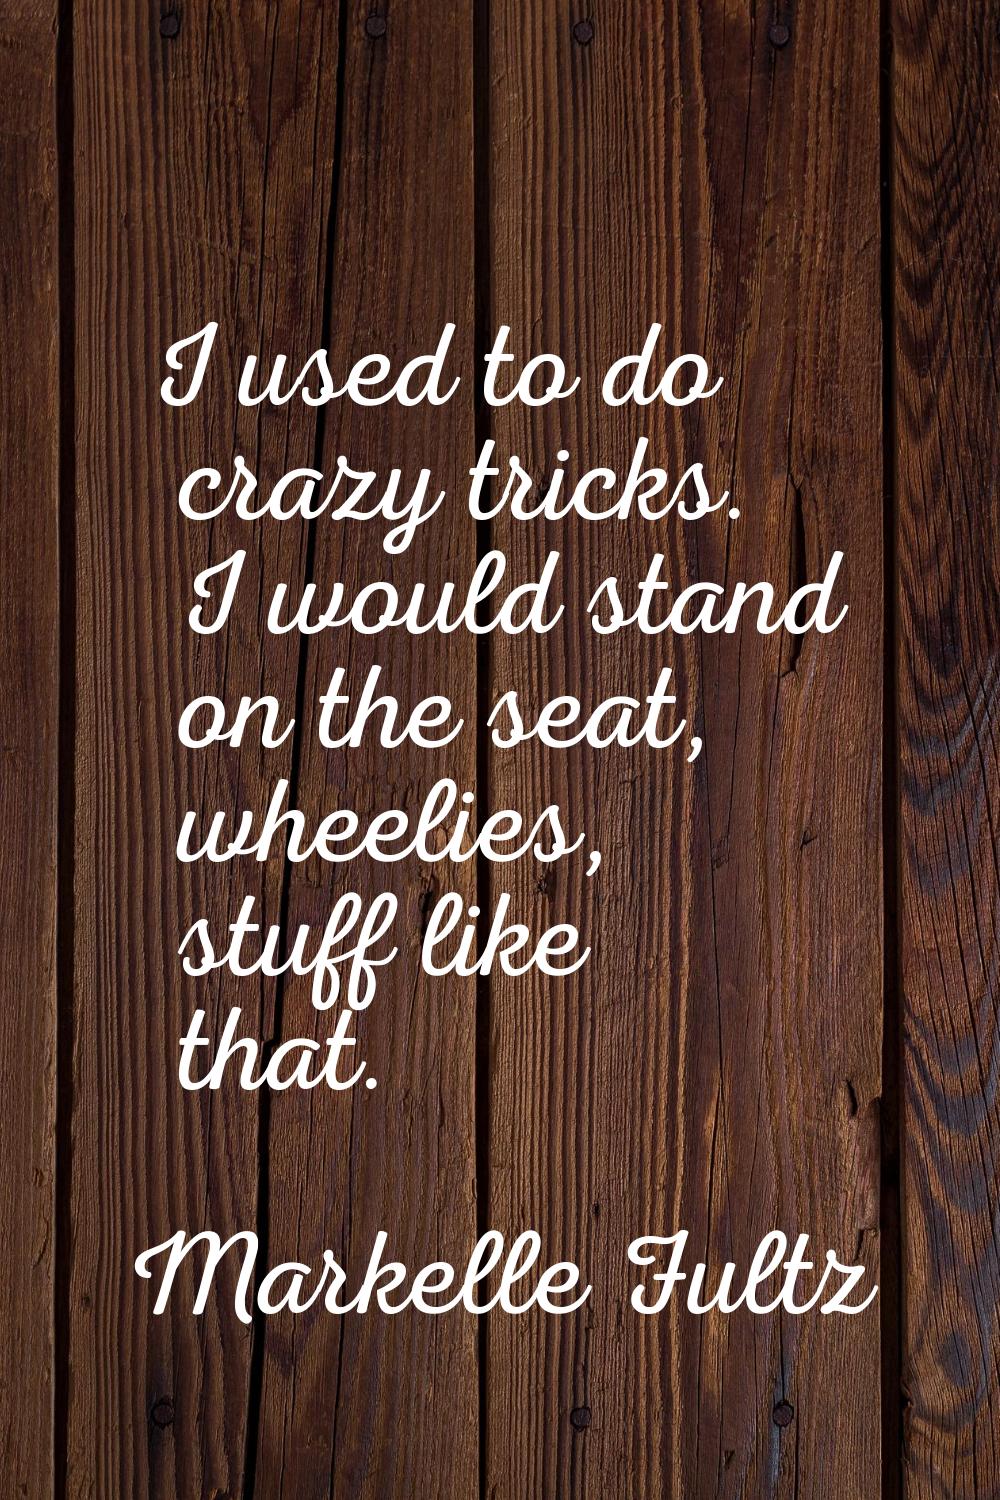 I used to do crazy tricks. I would stand on the seat, wheelies, stuff like that.